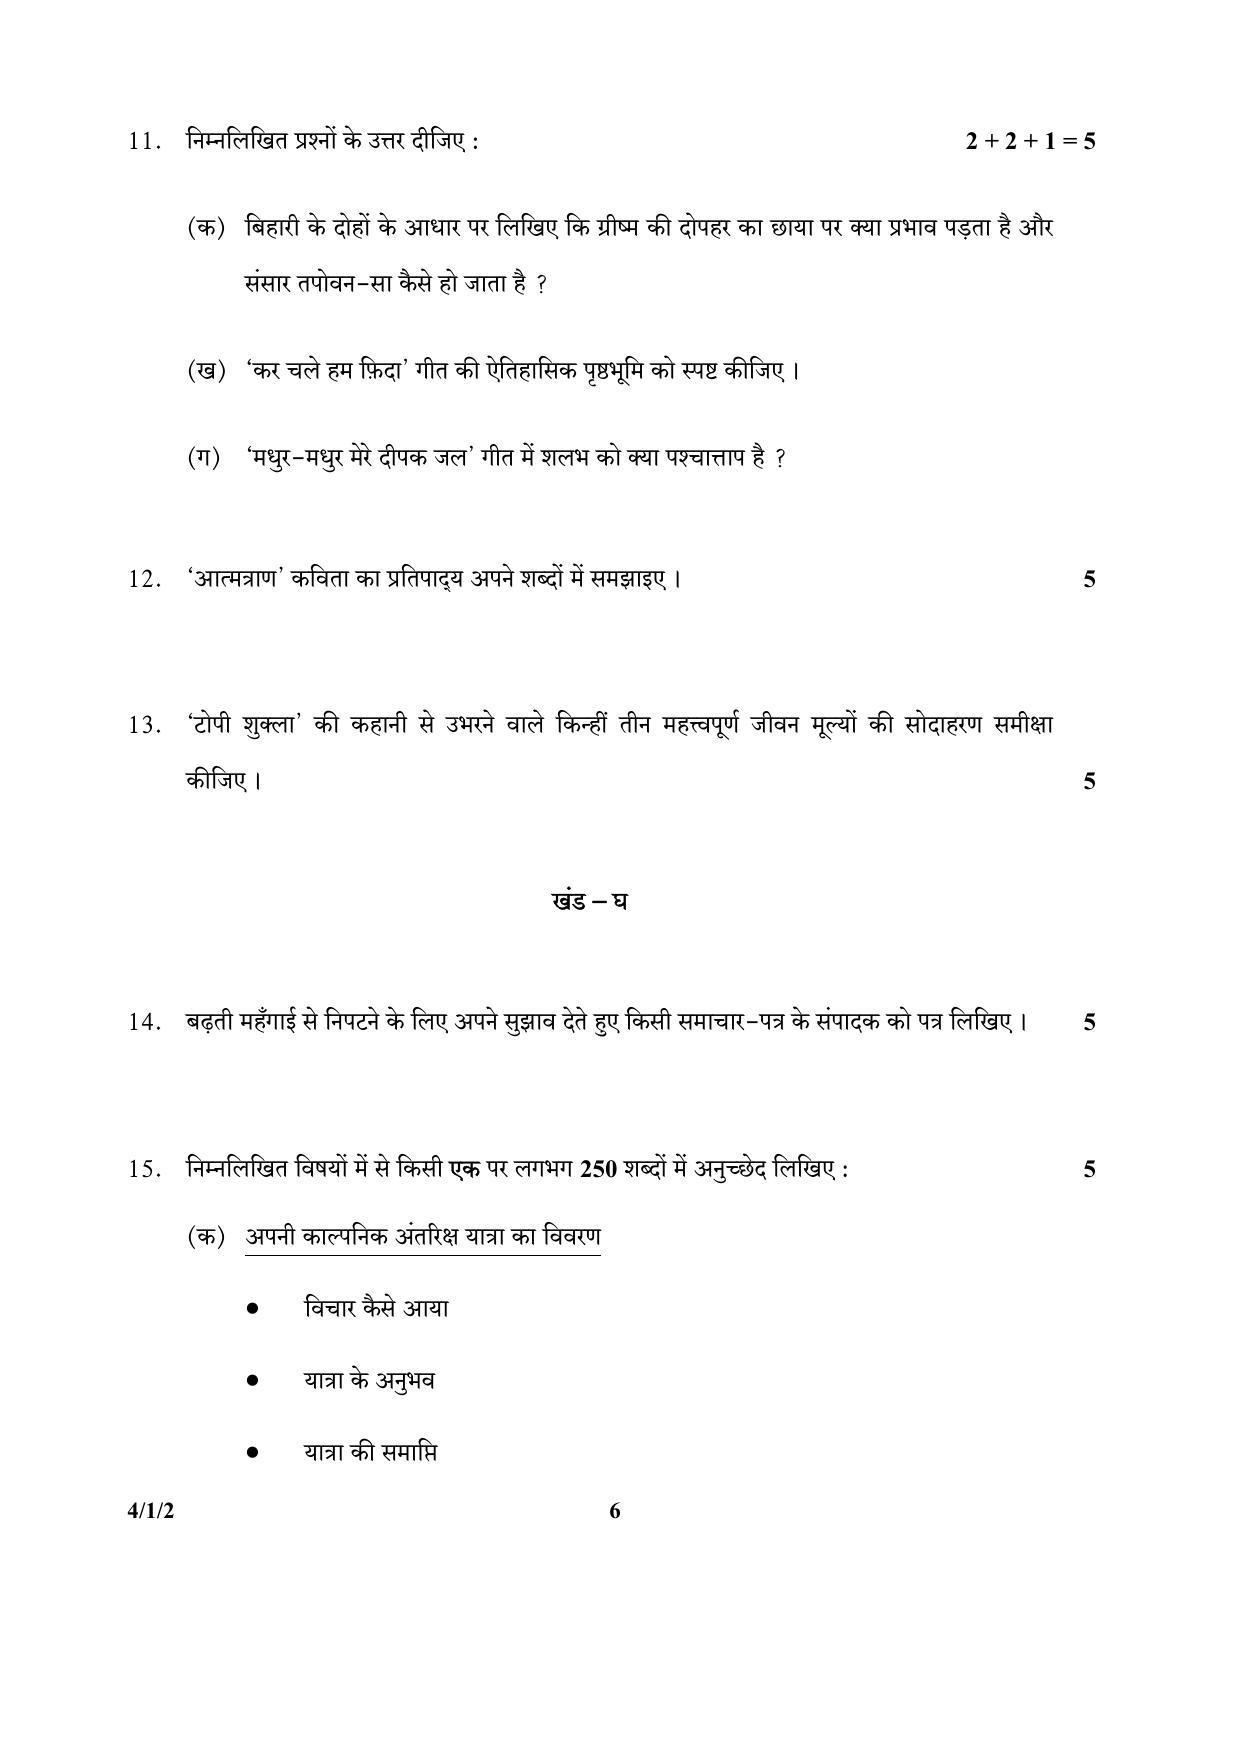 CBSE Class 10 4-1-2_Hindi 2017-comptt Question Paper - Page 6